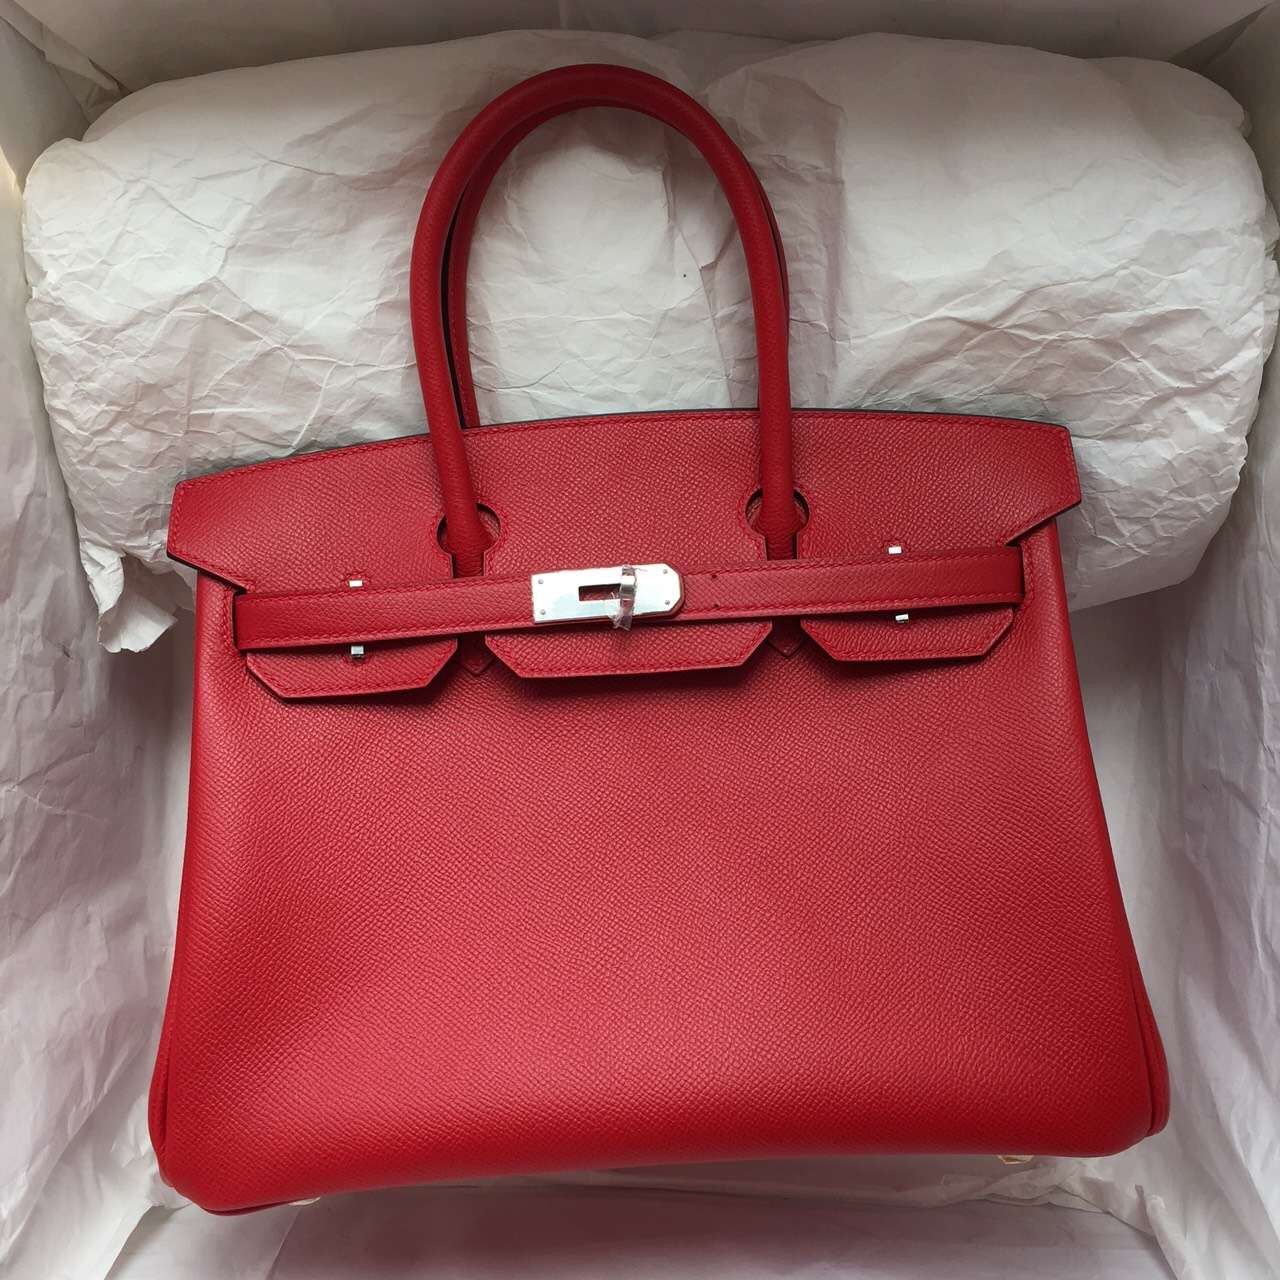 Different Styles Of Hermes Handbags Online | Paul Smith